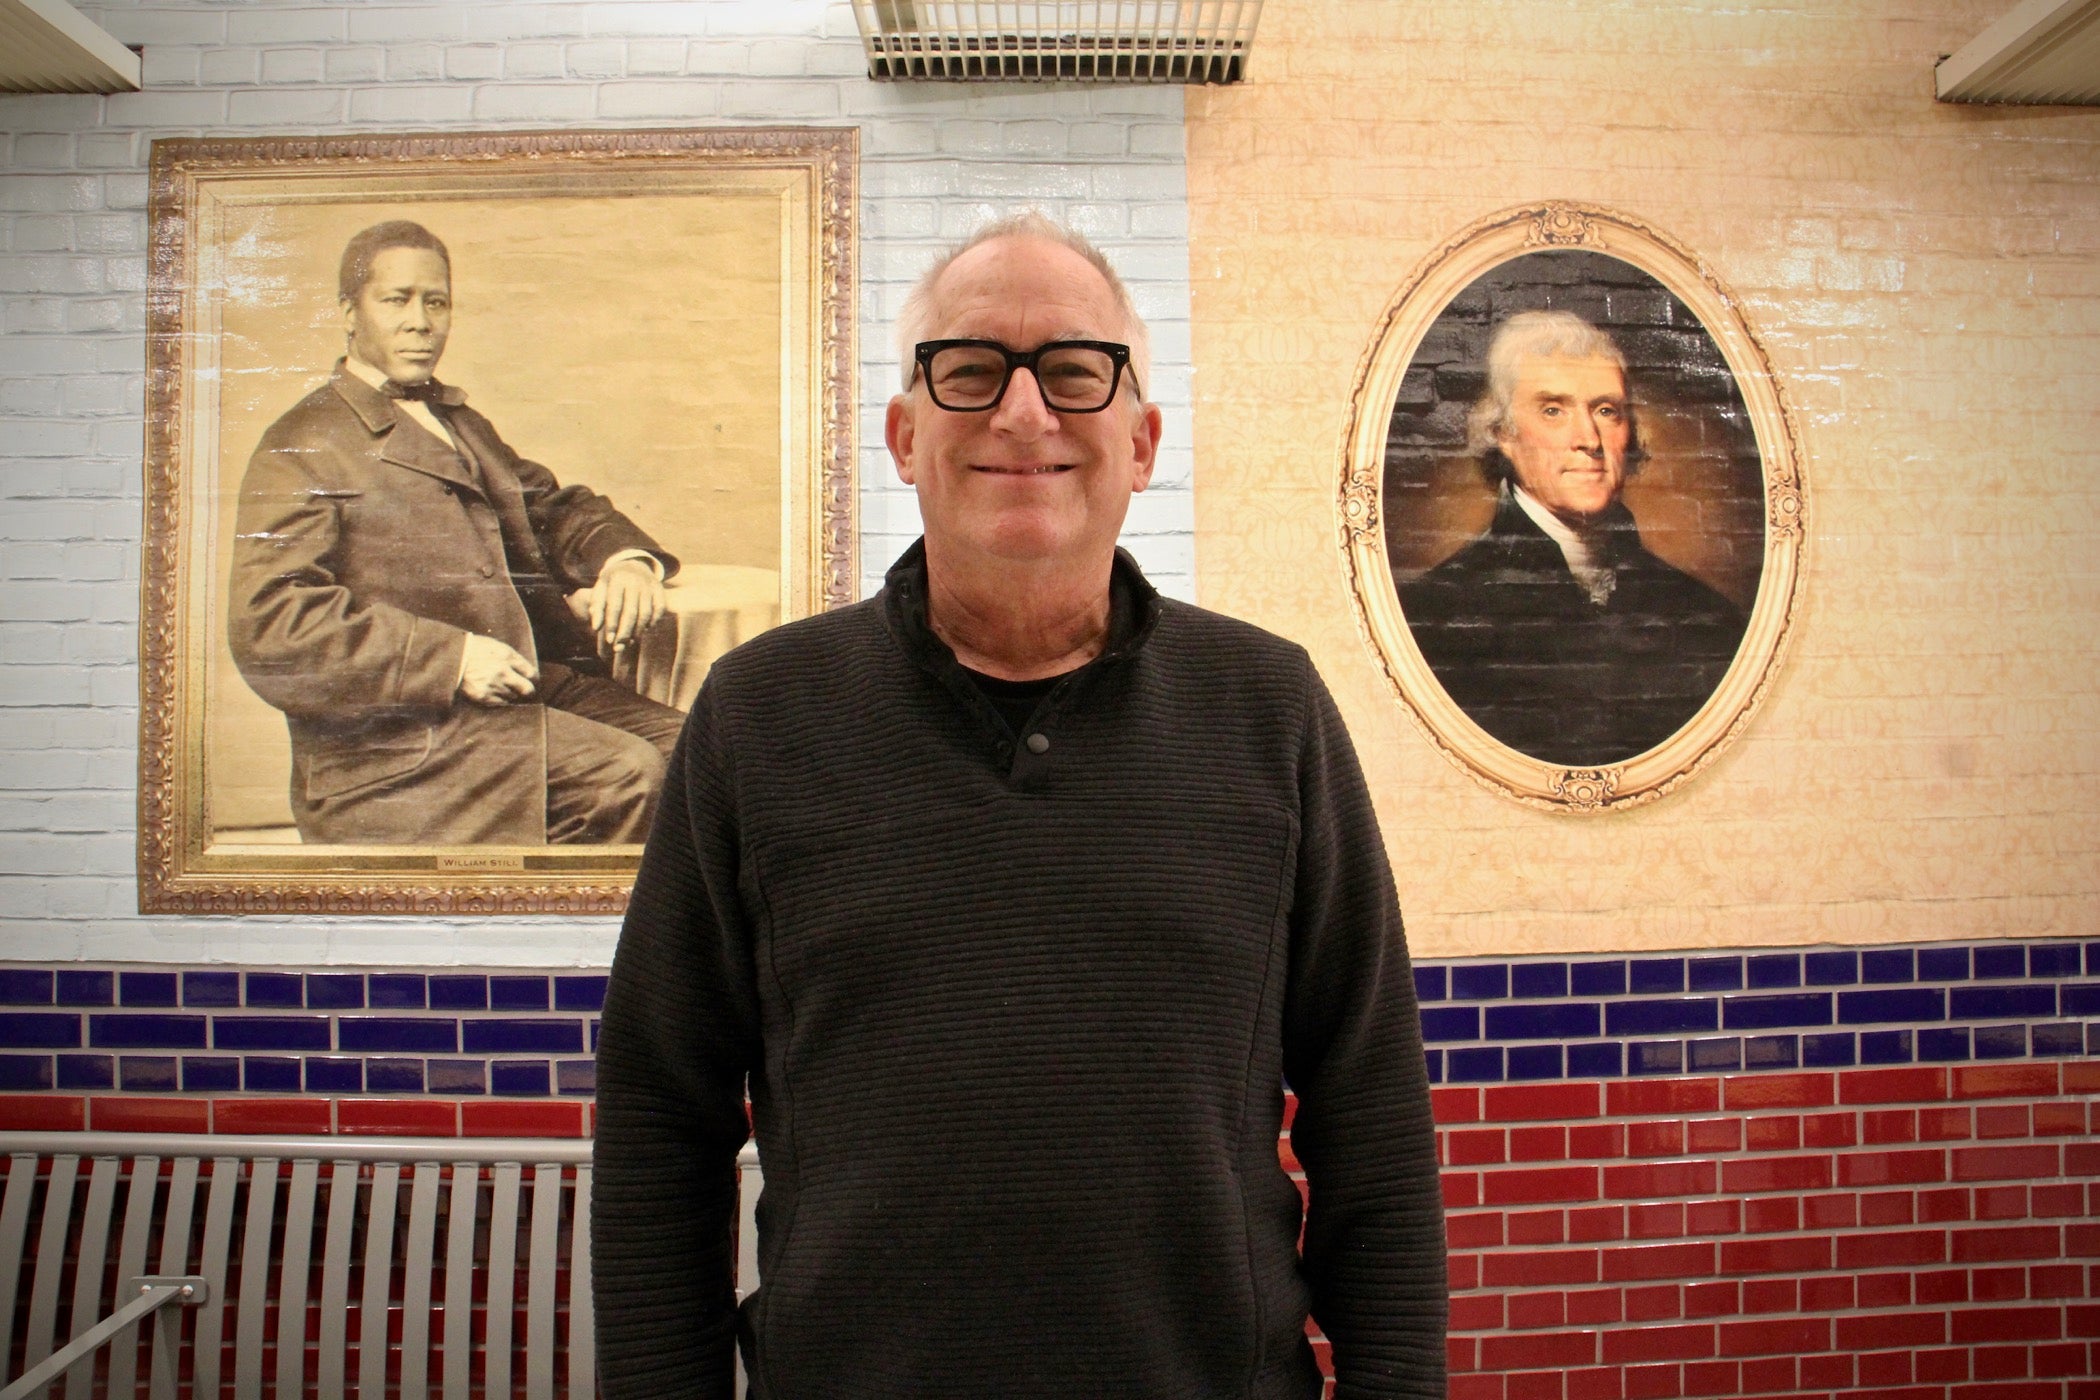 Artist Tom Judd created the murals for the Independence Hall SEPTA Station. He stands between portraits of abolitionist William Still and founding father Thomas Jefferson. (Emma Lee/WHYY)